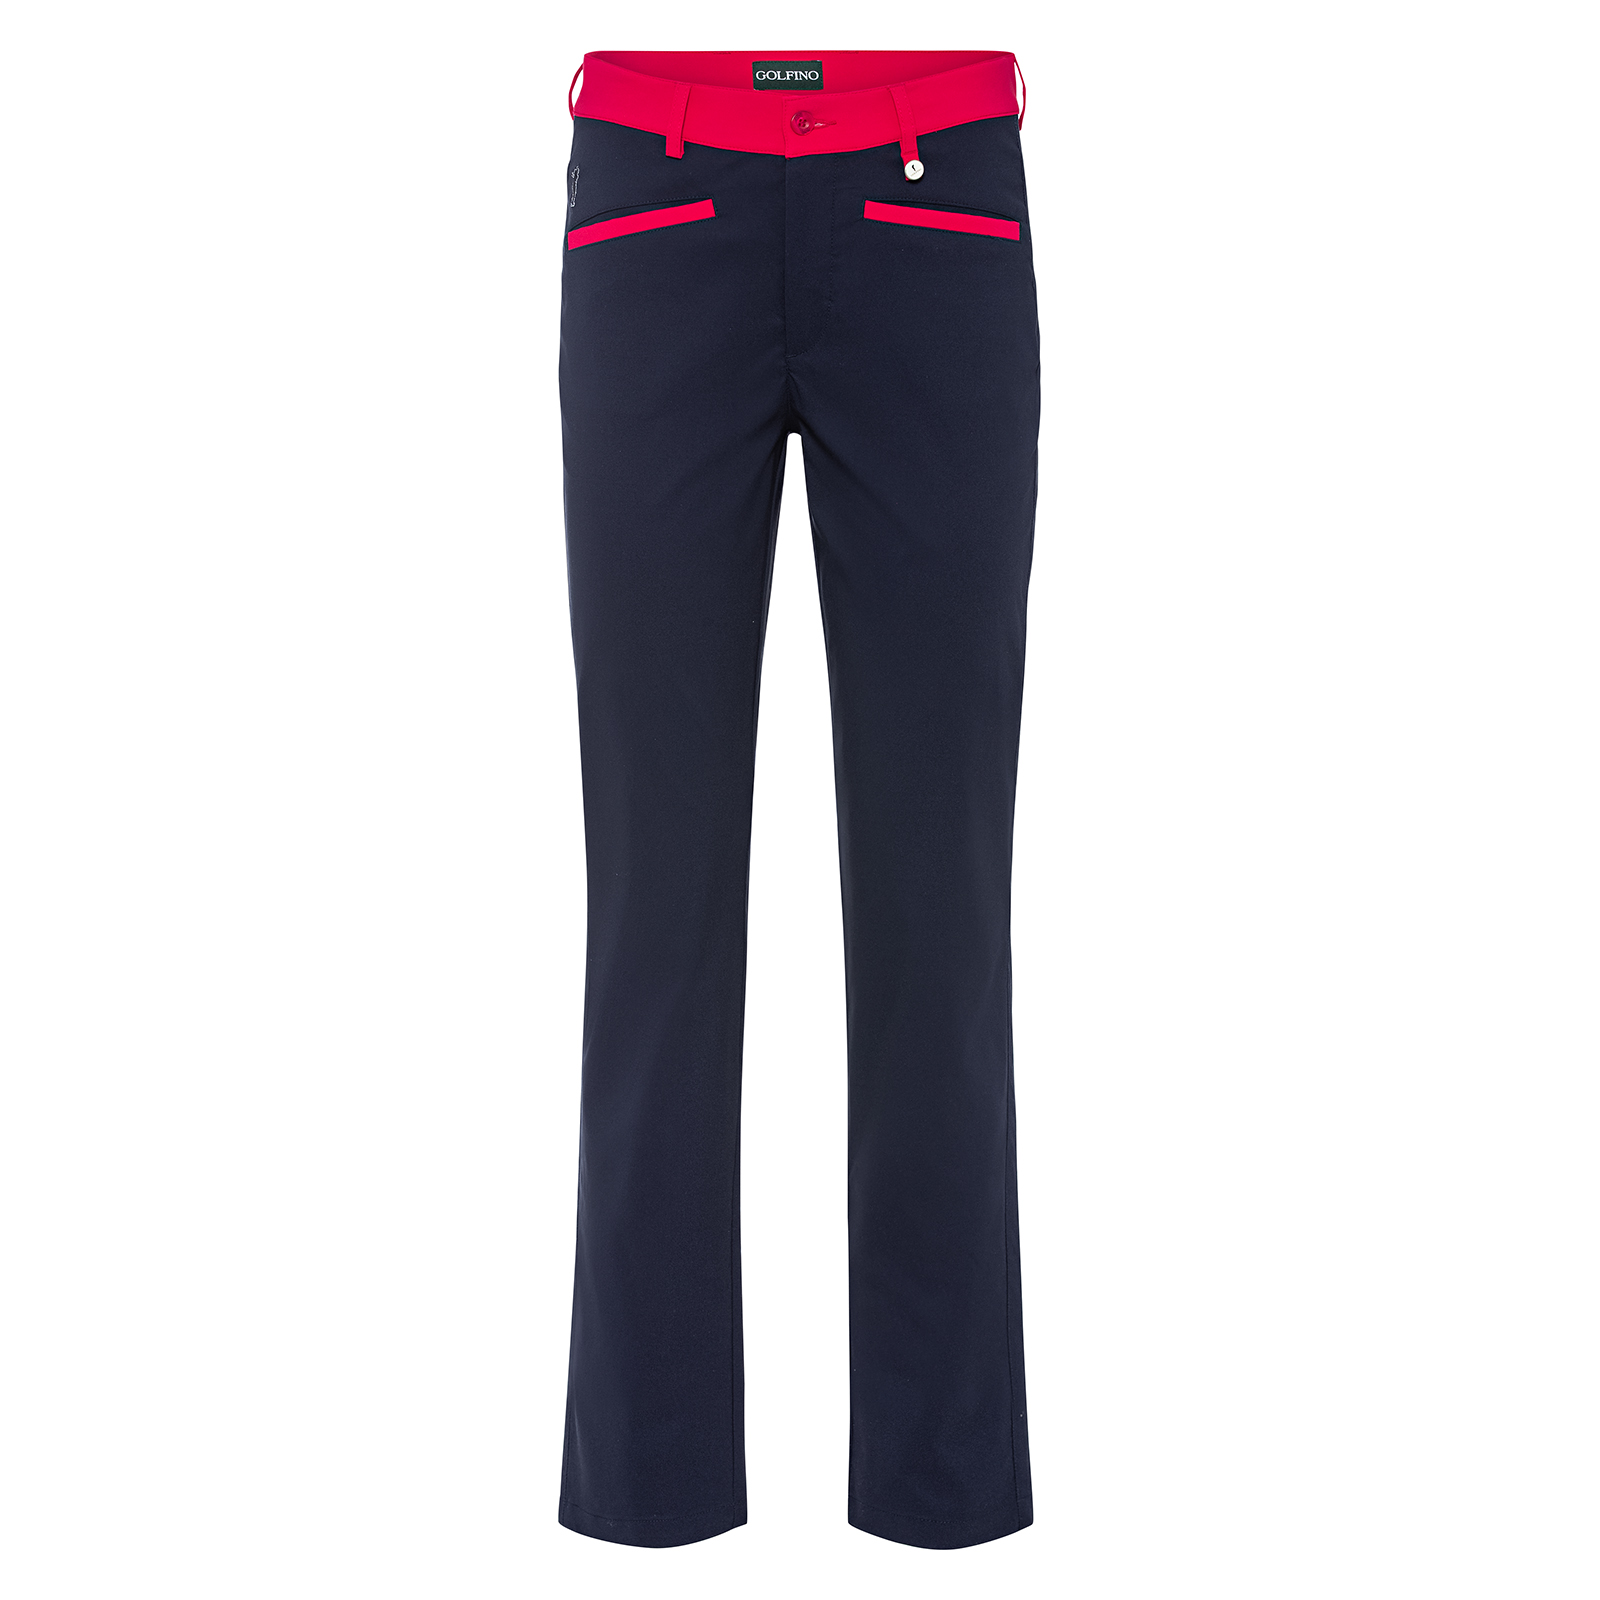 Attractive ladies' 7/8 golf trousers 